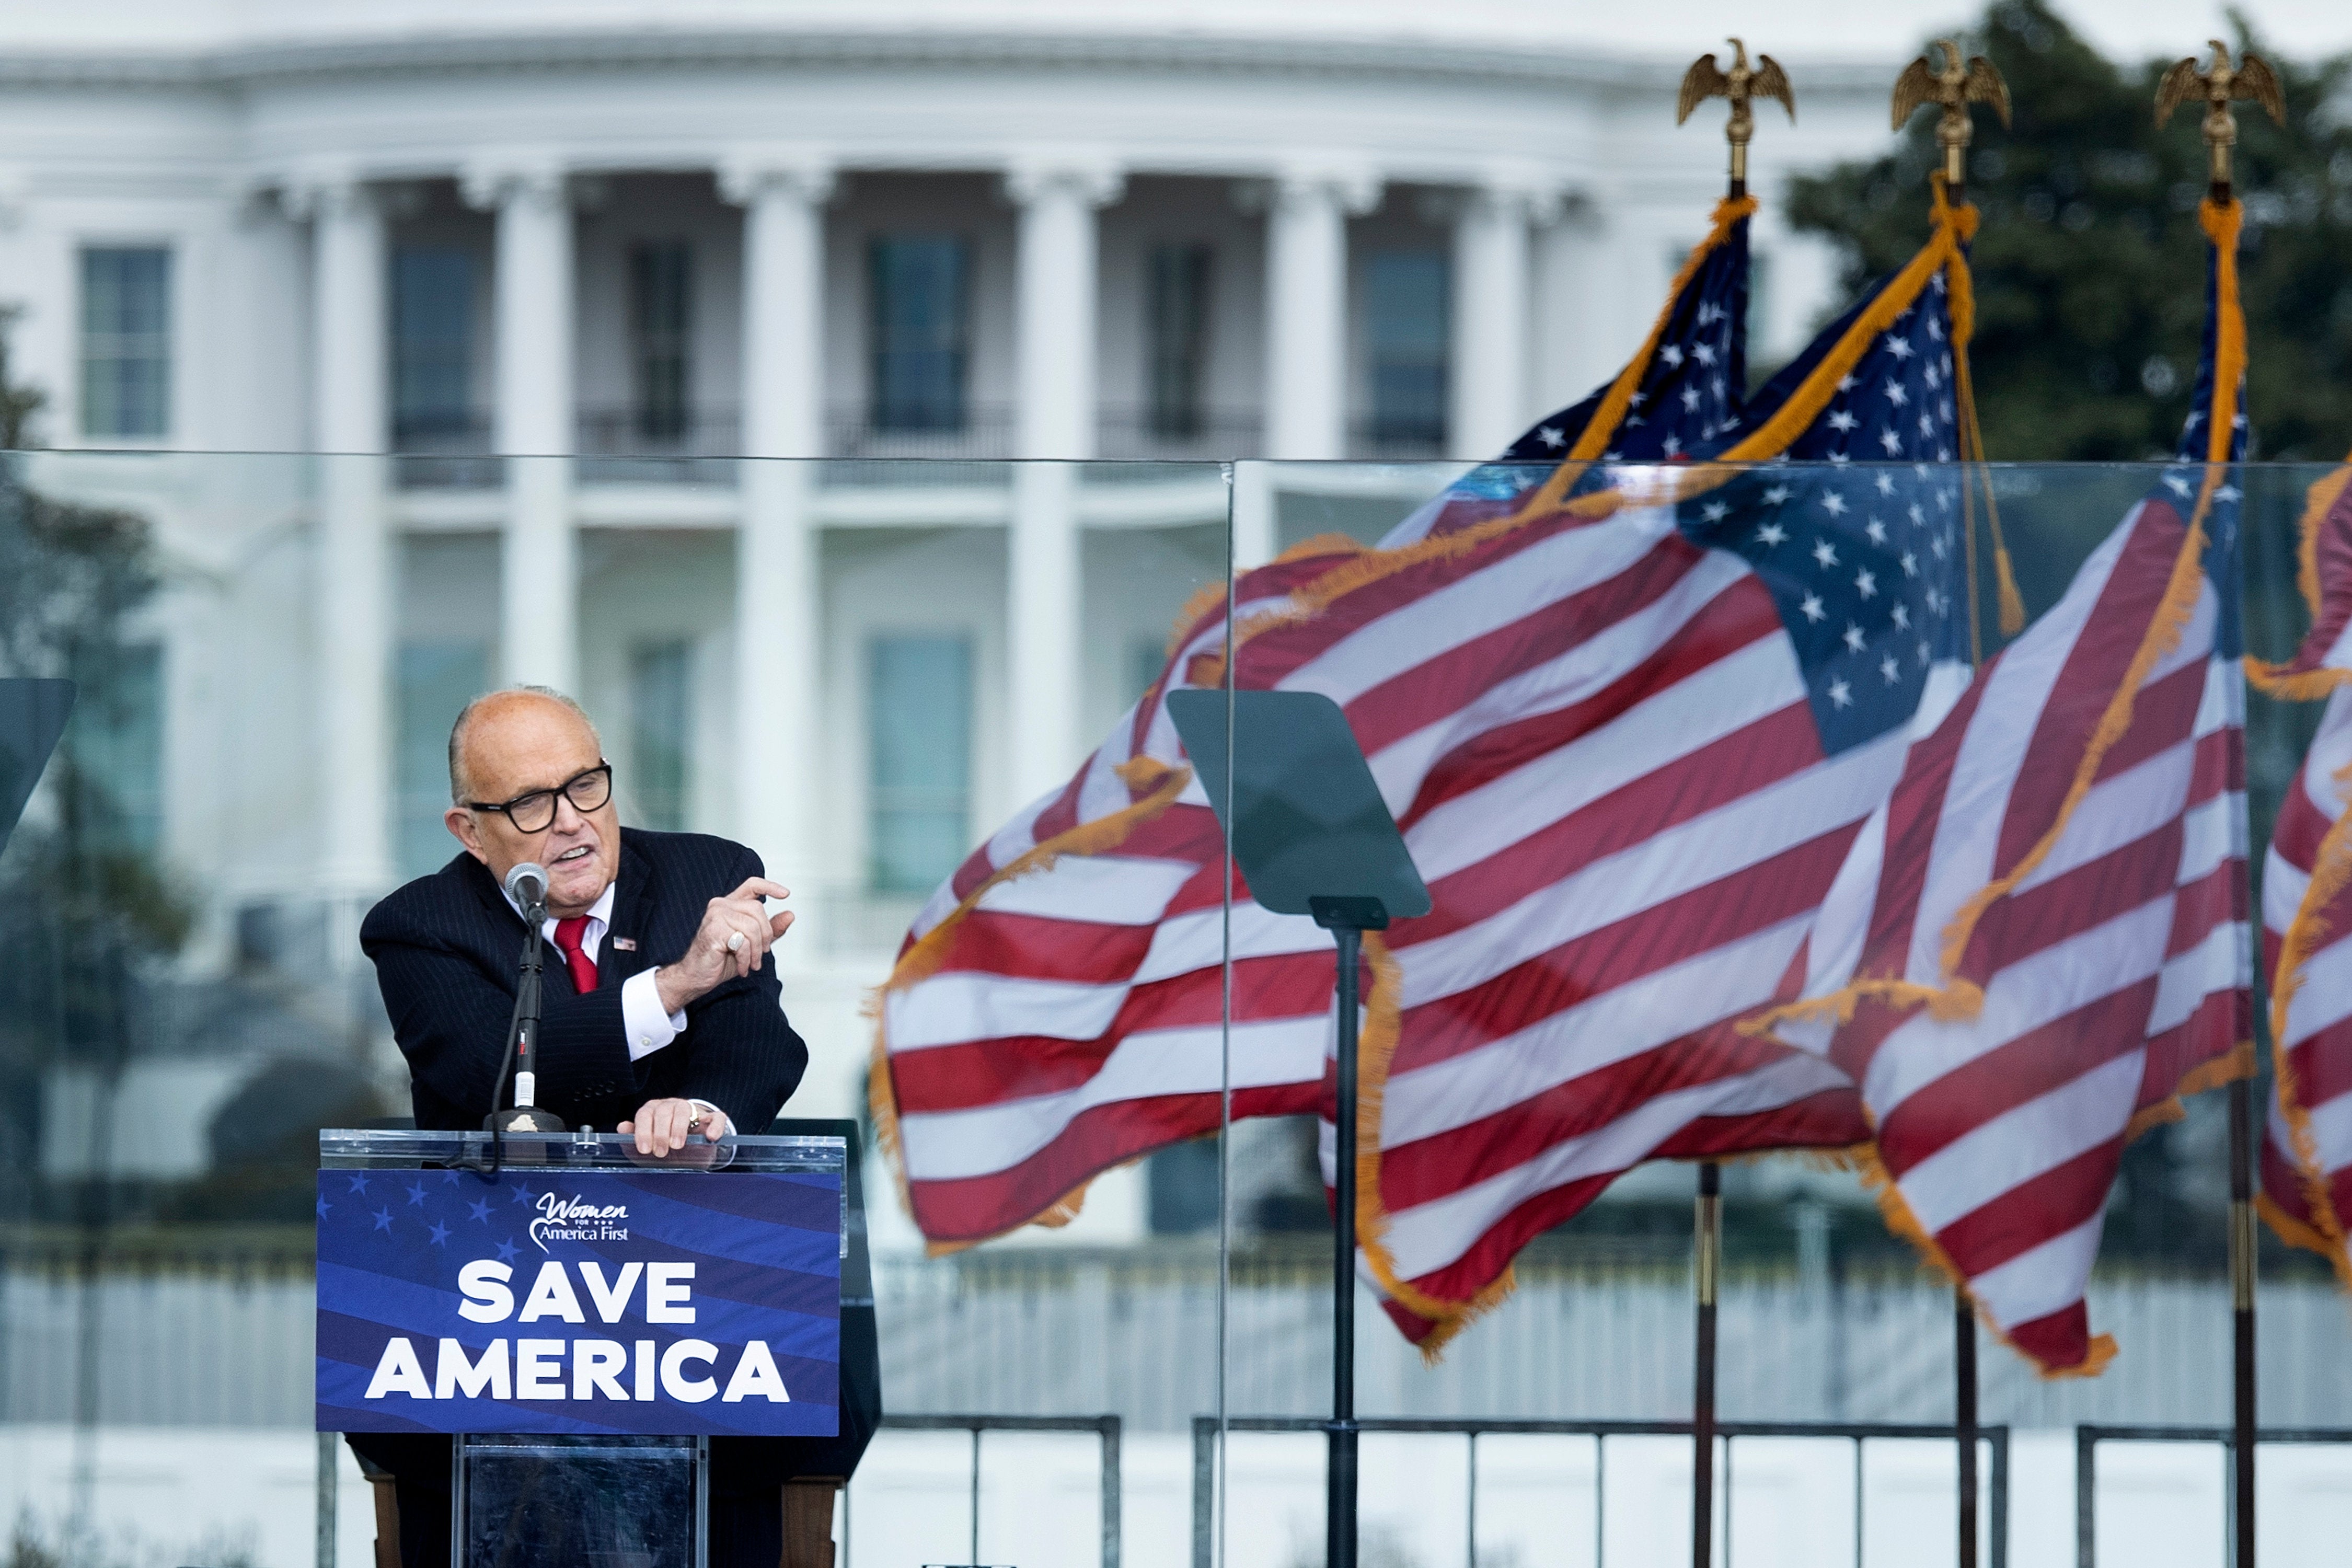 Rudy Giuliani speaks to Donald Trump supporters from The Ellipse near the White House on 6 January 2021, in Washington, DC, just prior to the storming of the US Capitol